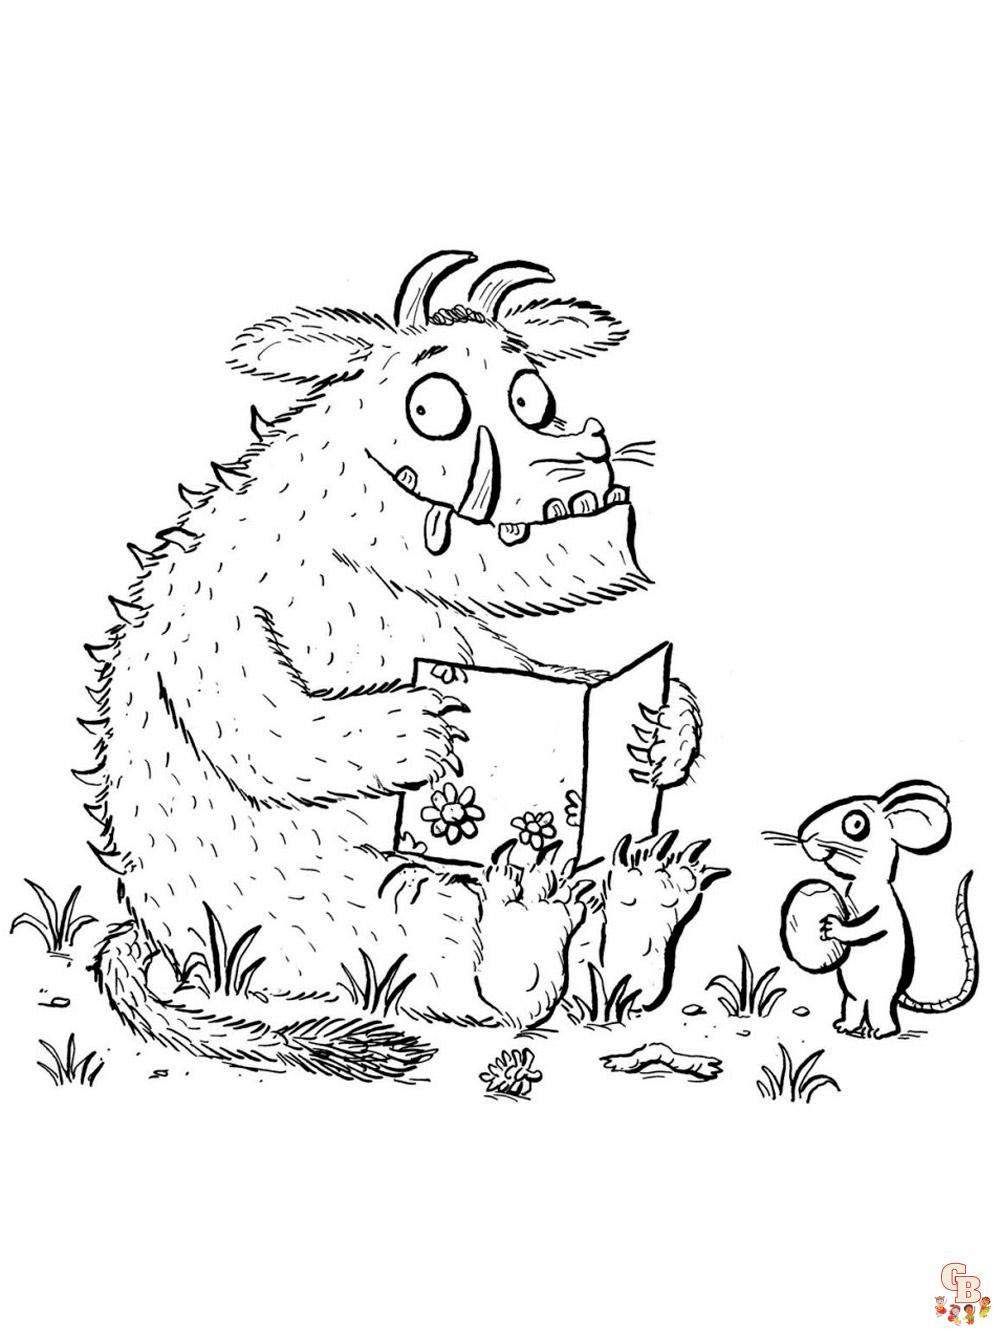 Gruffalo Coloring Pages 15